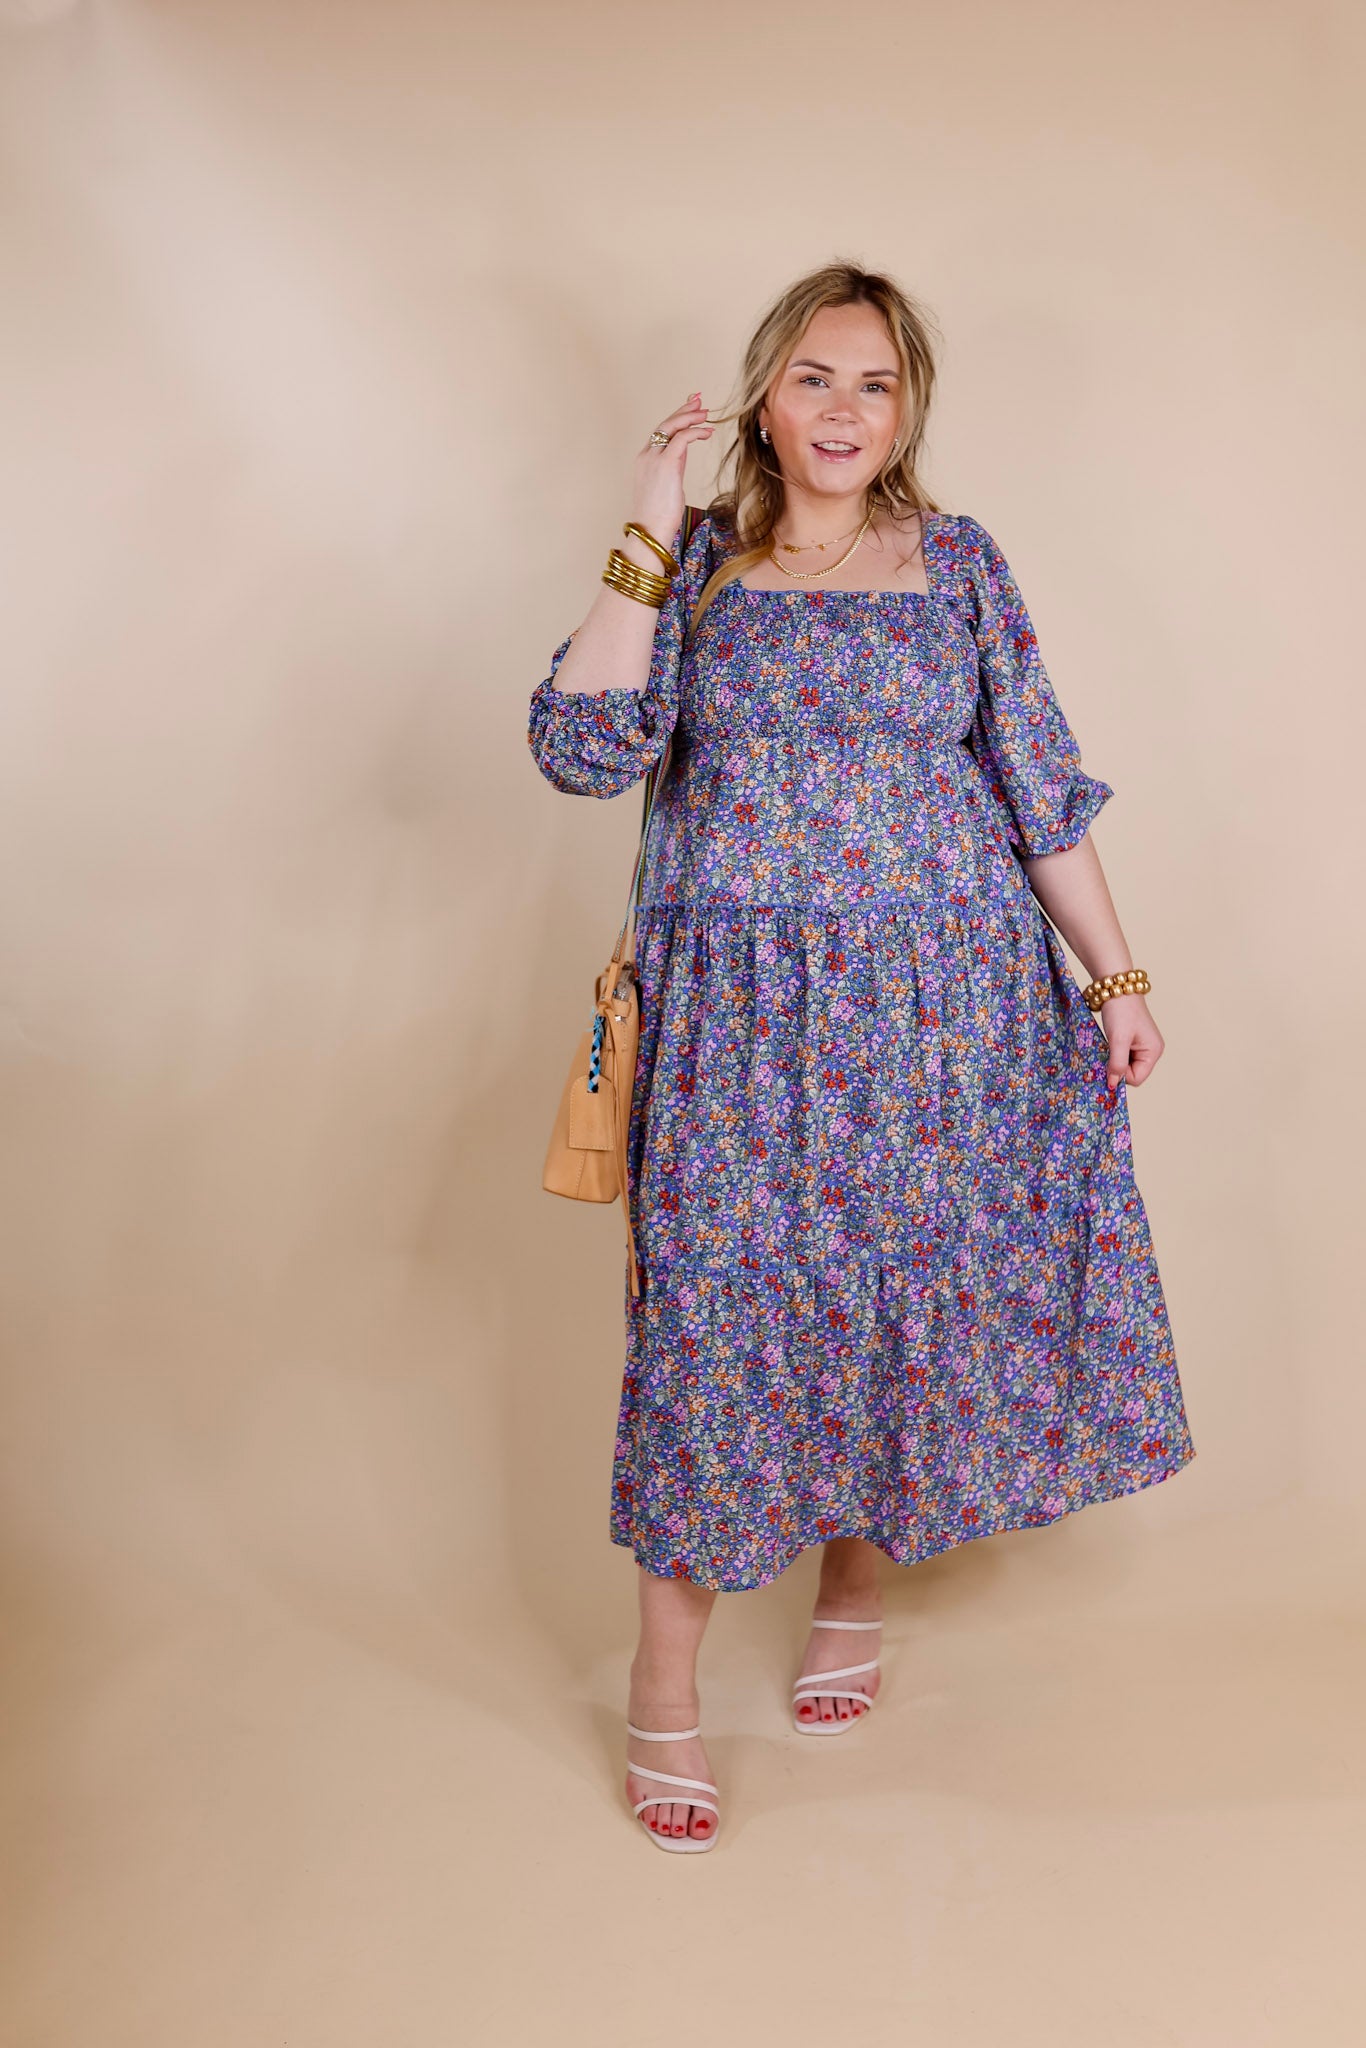 Spring Blooms Smocked Floral Maxi Dress in Blue - Giddy Up Glamour Boutique